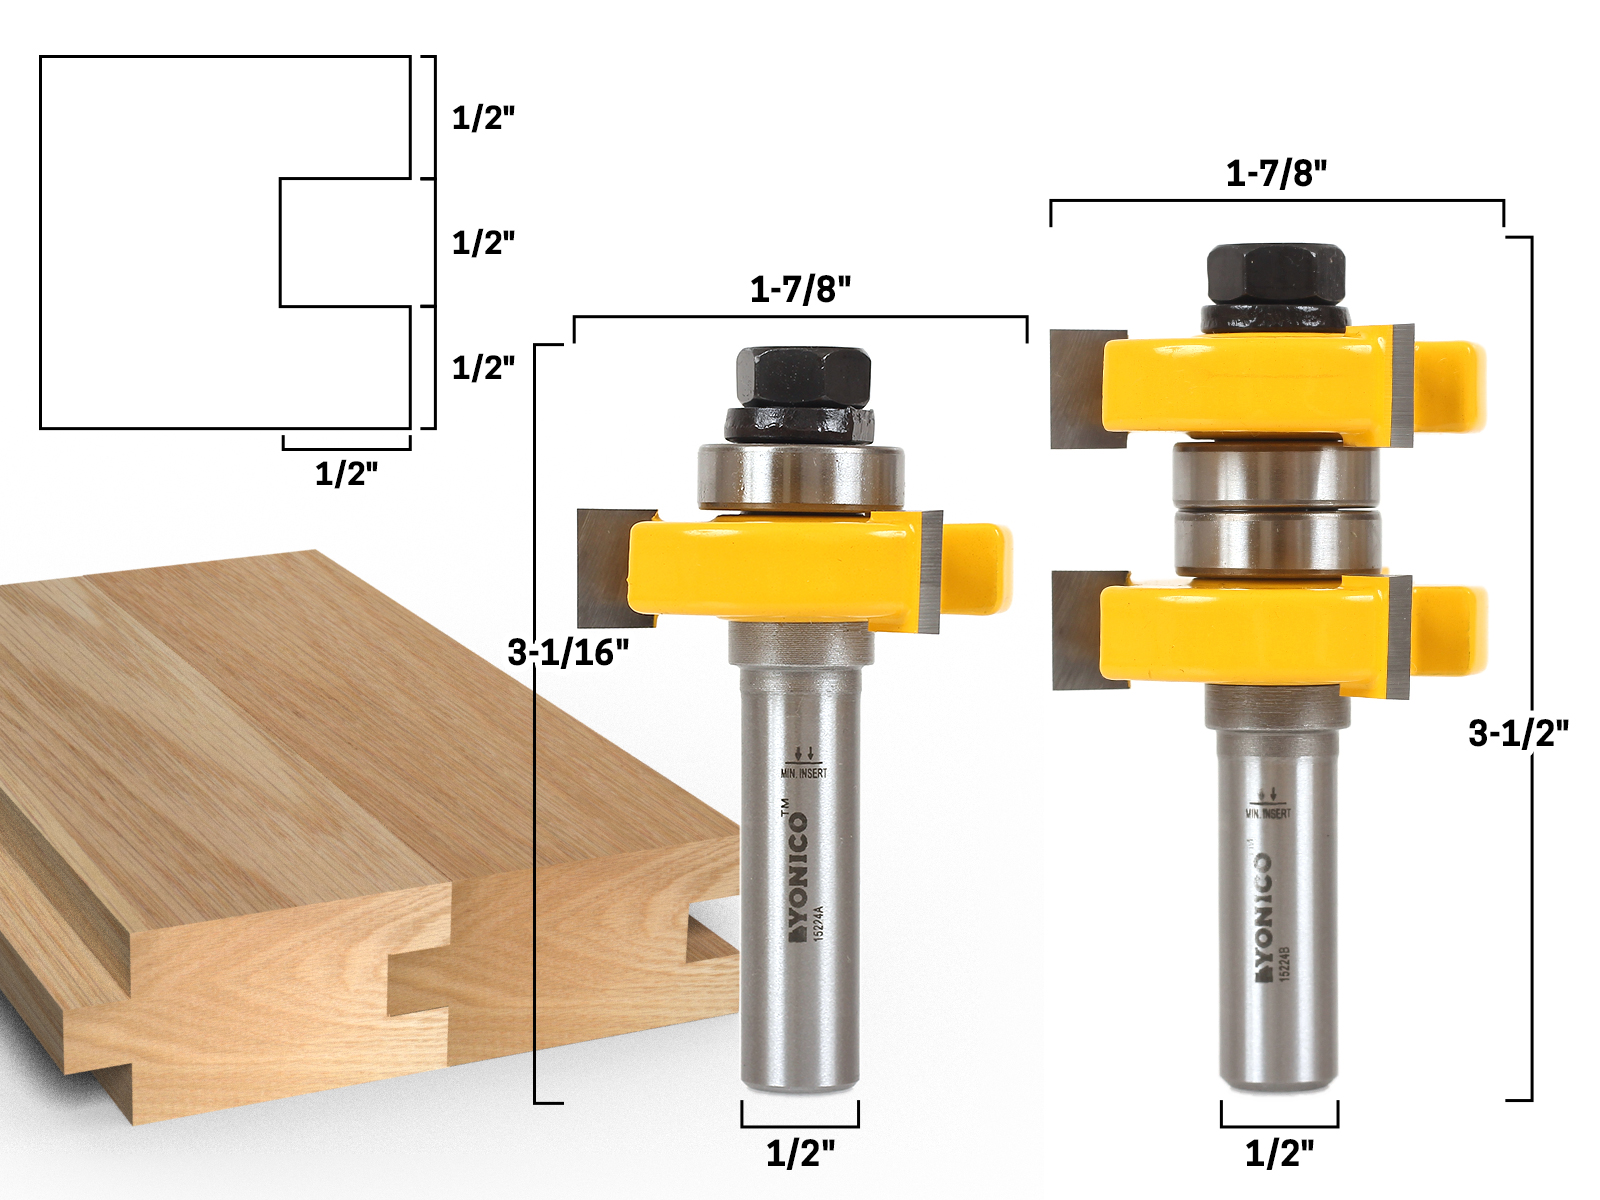 2X Tongue and Groove Router Bits Kit 1/4" Shank T-type 3-tooth Useful Cutter New 